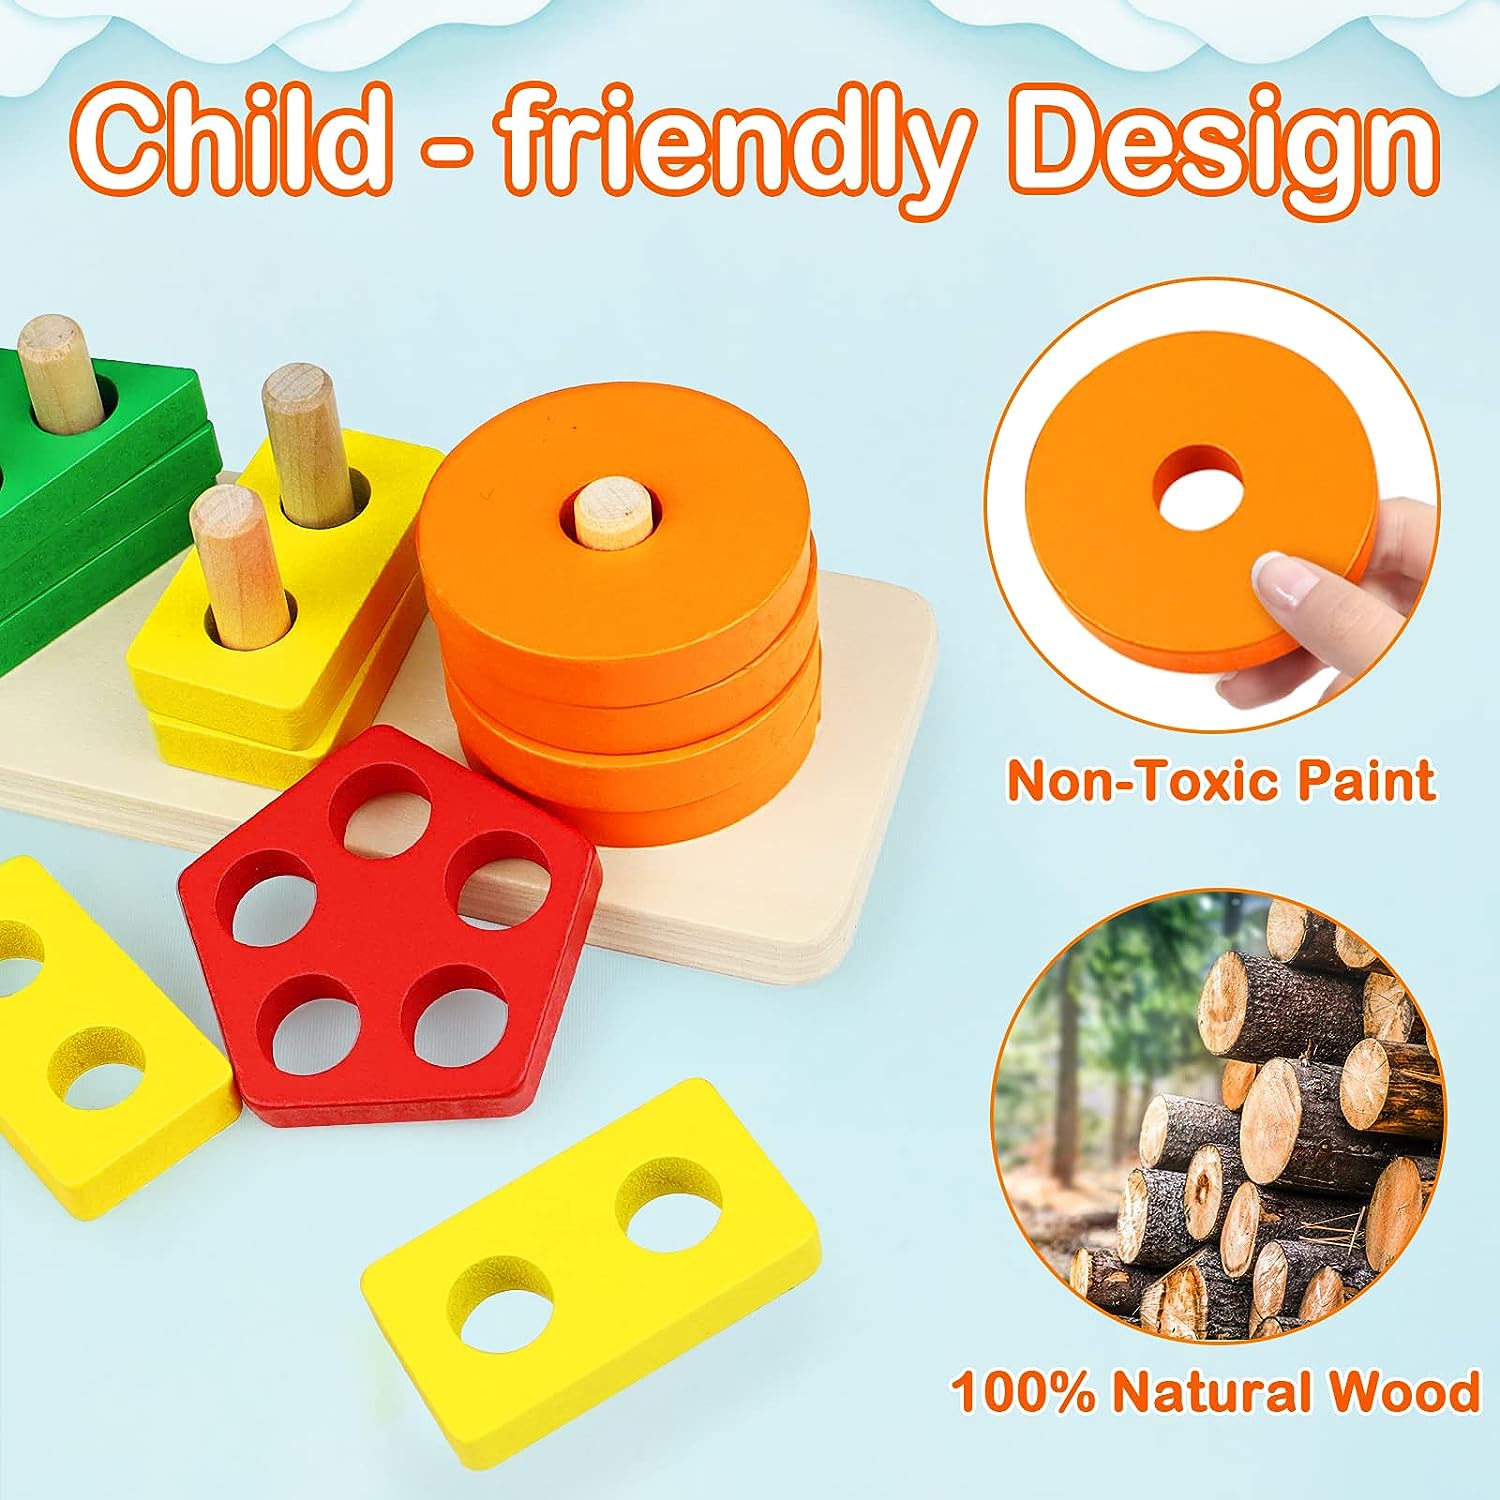 Montessori Toys for 1 to 3-Year-Old Boys Girls Toddlers, Wooden Sorting & Stacking Toys for Kids Preschool, Educational Toys, Color Recognition Stacker Shape Sorter, Learning Puzzles Gift